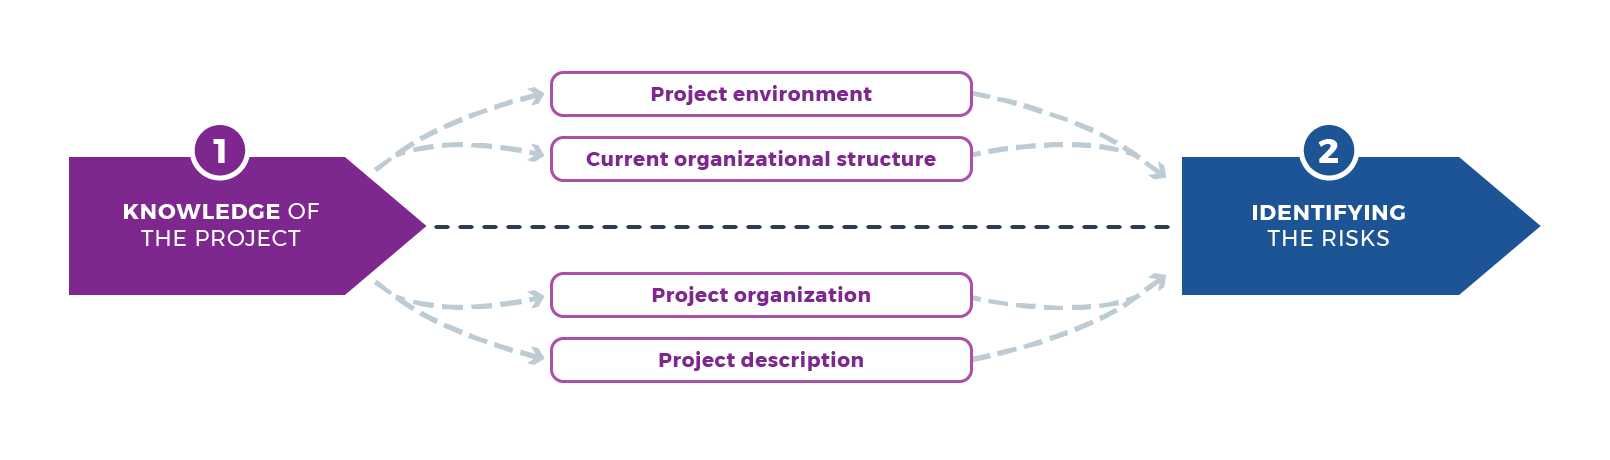 Project environment  Current organizational structure  Knowledge of the project  Identifying the risks  Organization  Project description